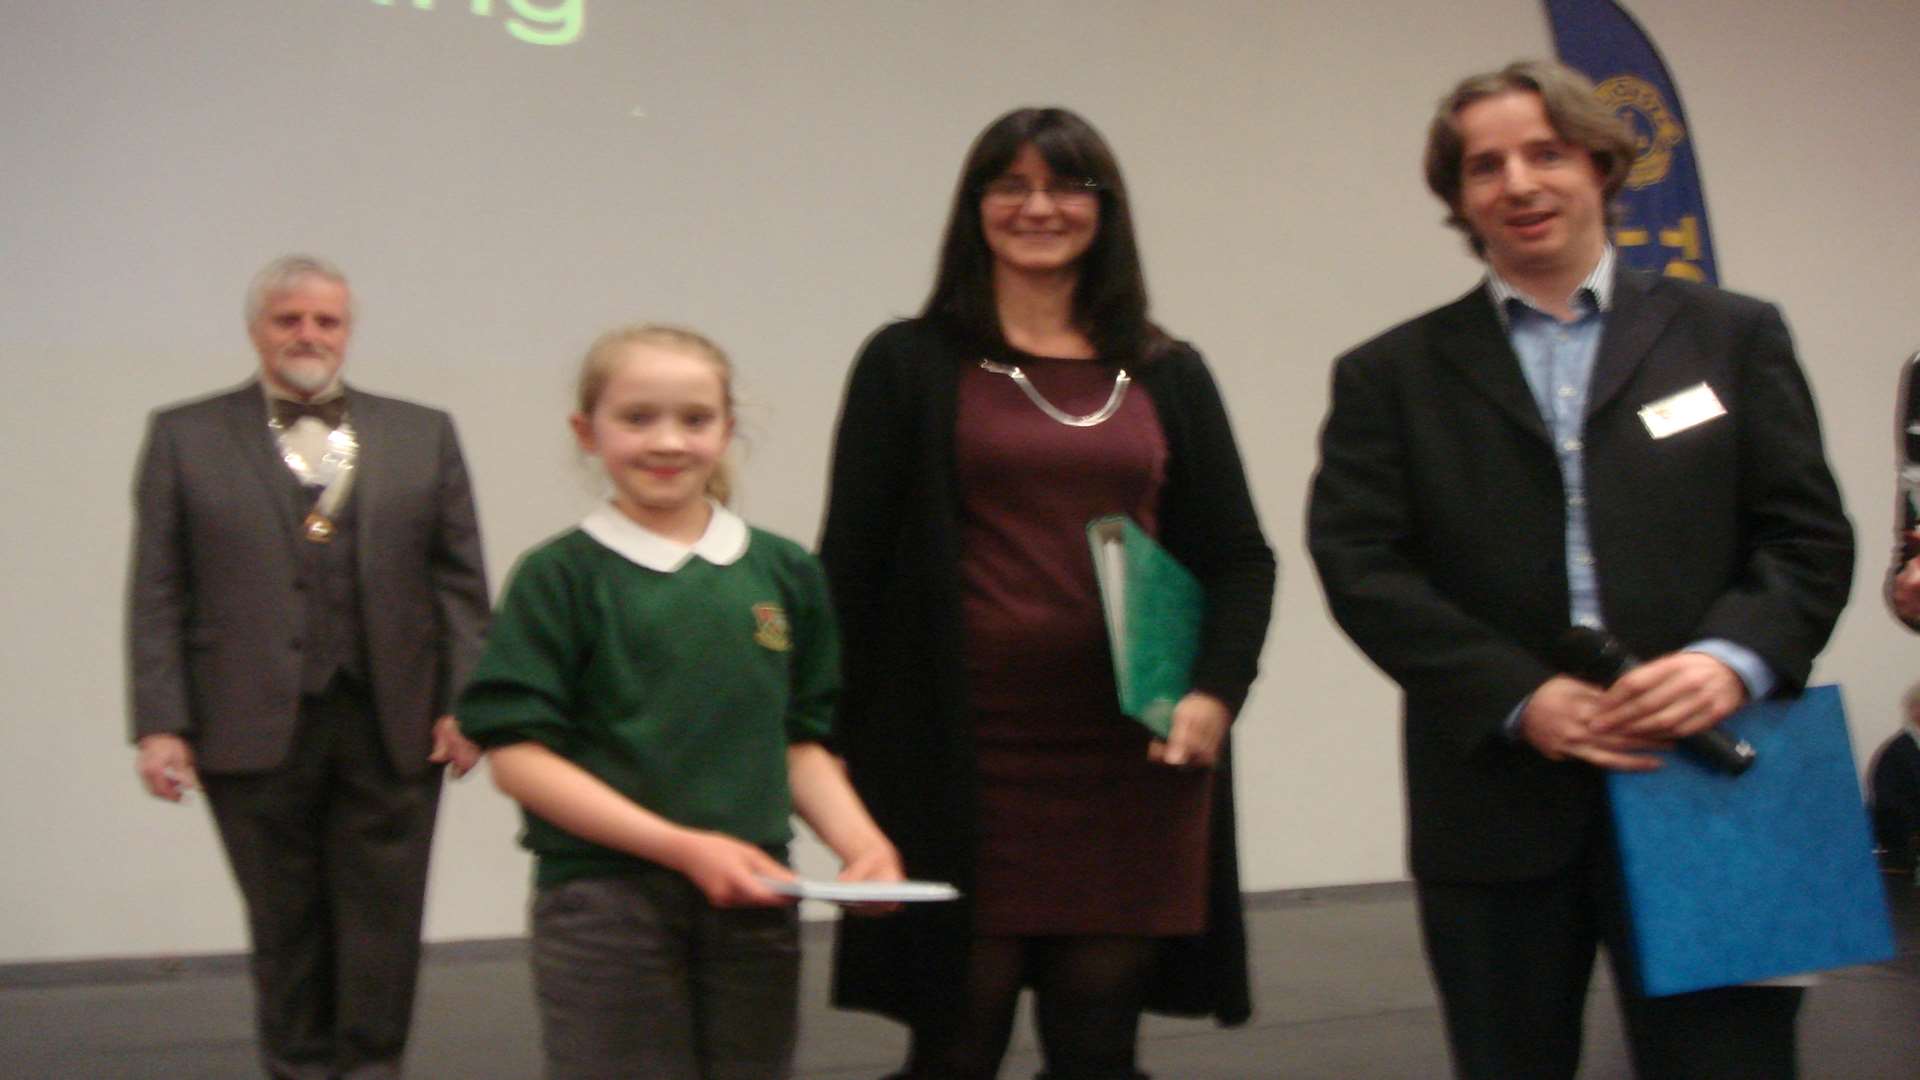 One of the choir from Slade School collects the first prize from the judges